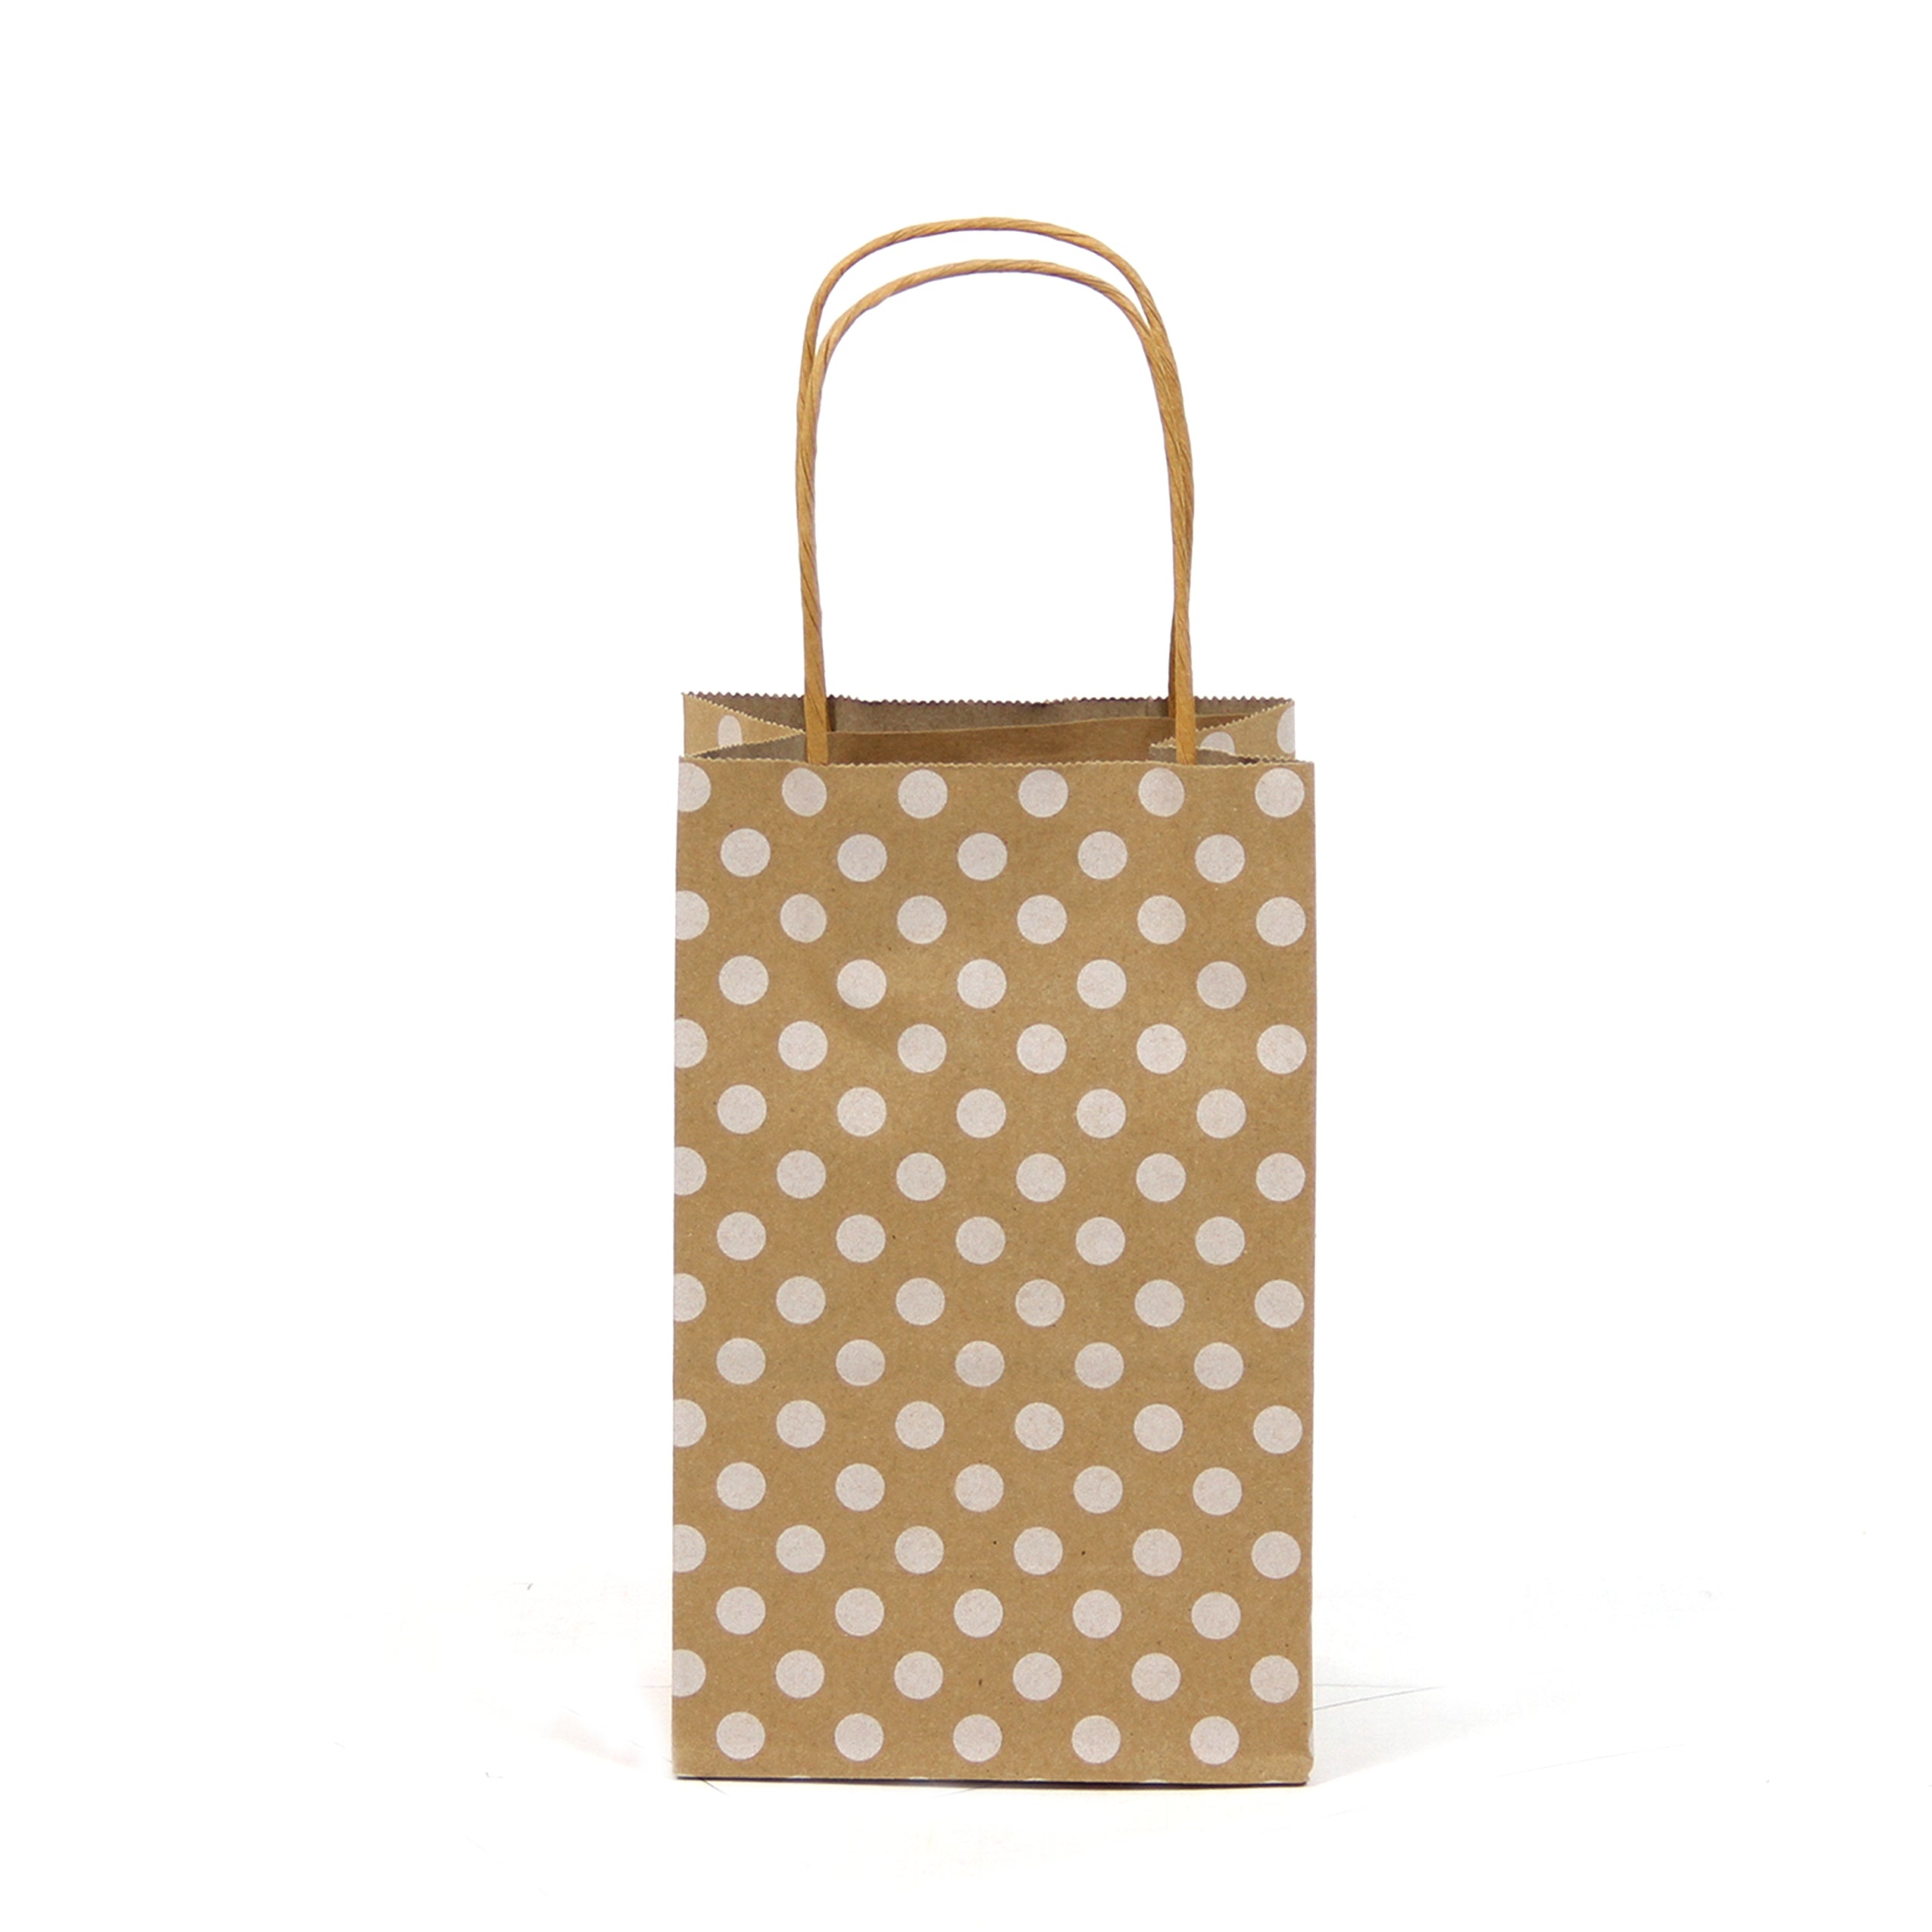 Brown Polka Dot, Kraft Bags, Gift Bags, Paper Bags, Reusable Bags, Favor Bags, Wedding Favor Bags - Gift Expressions